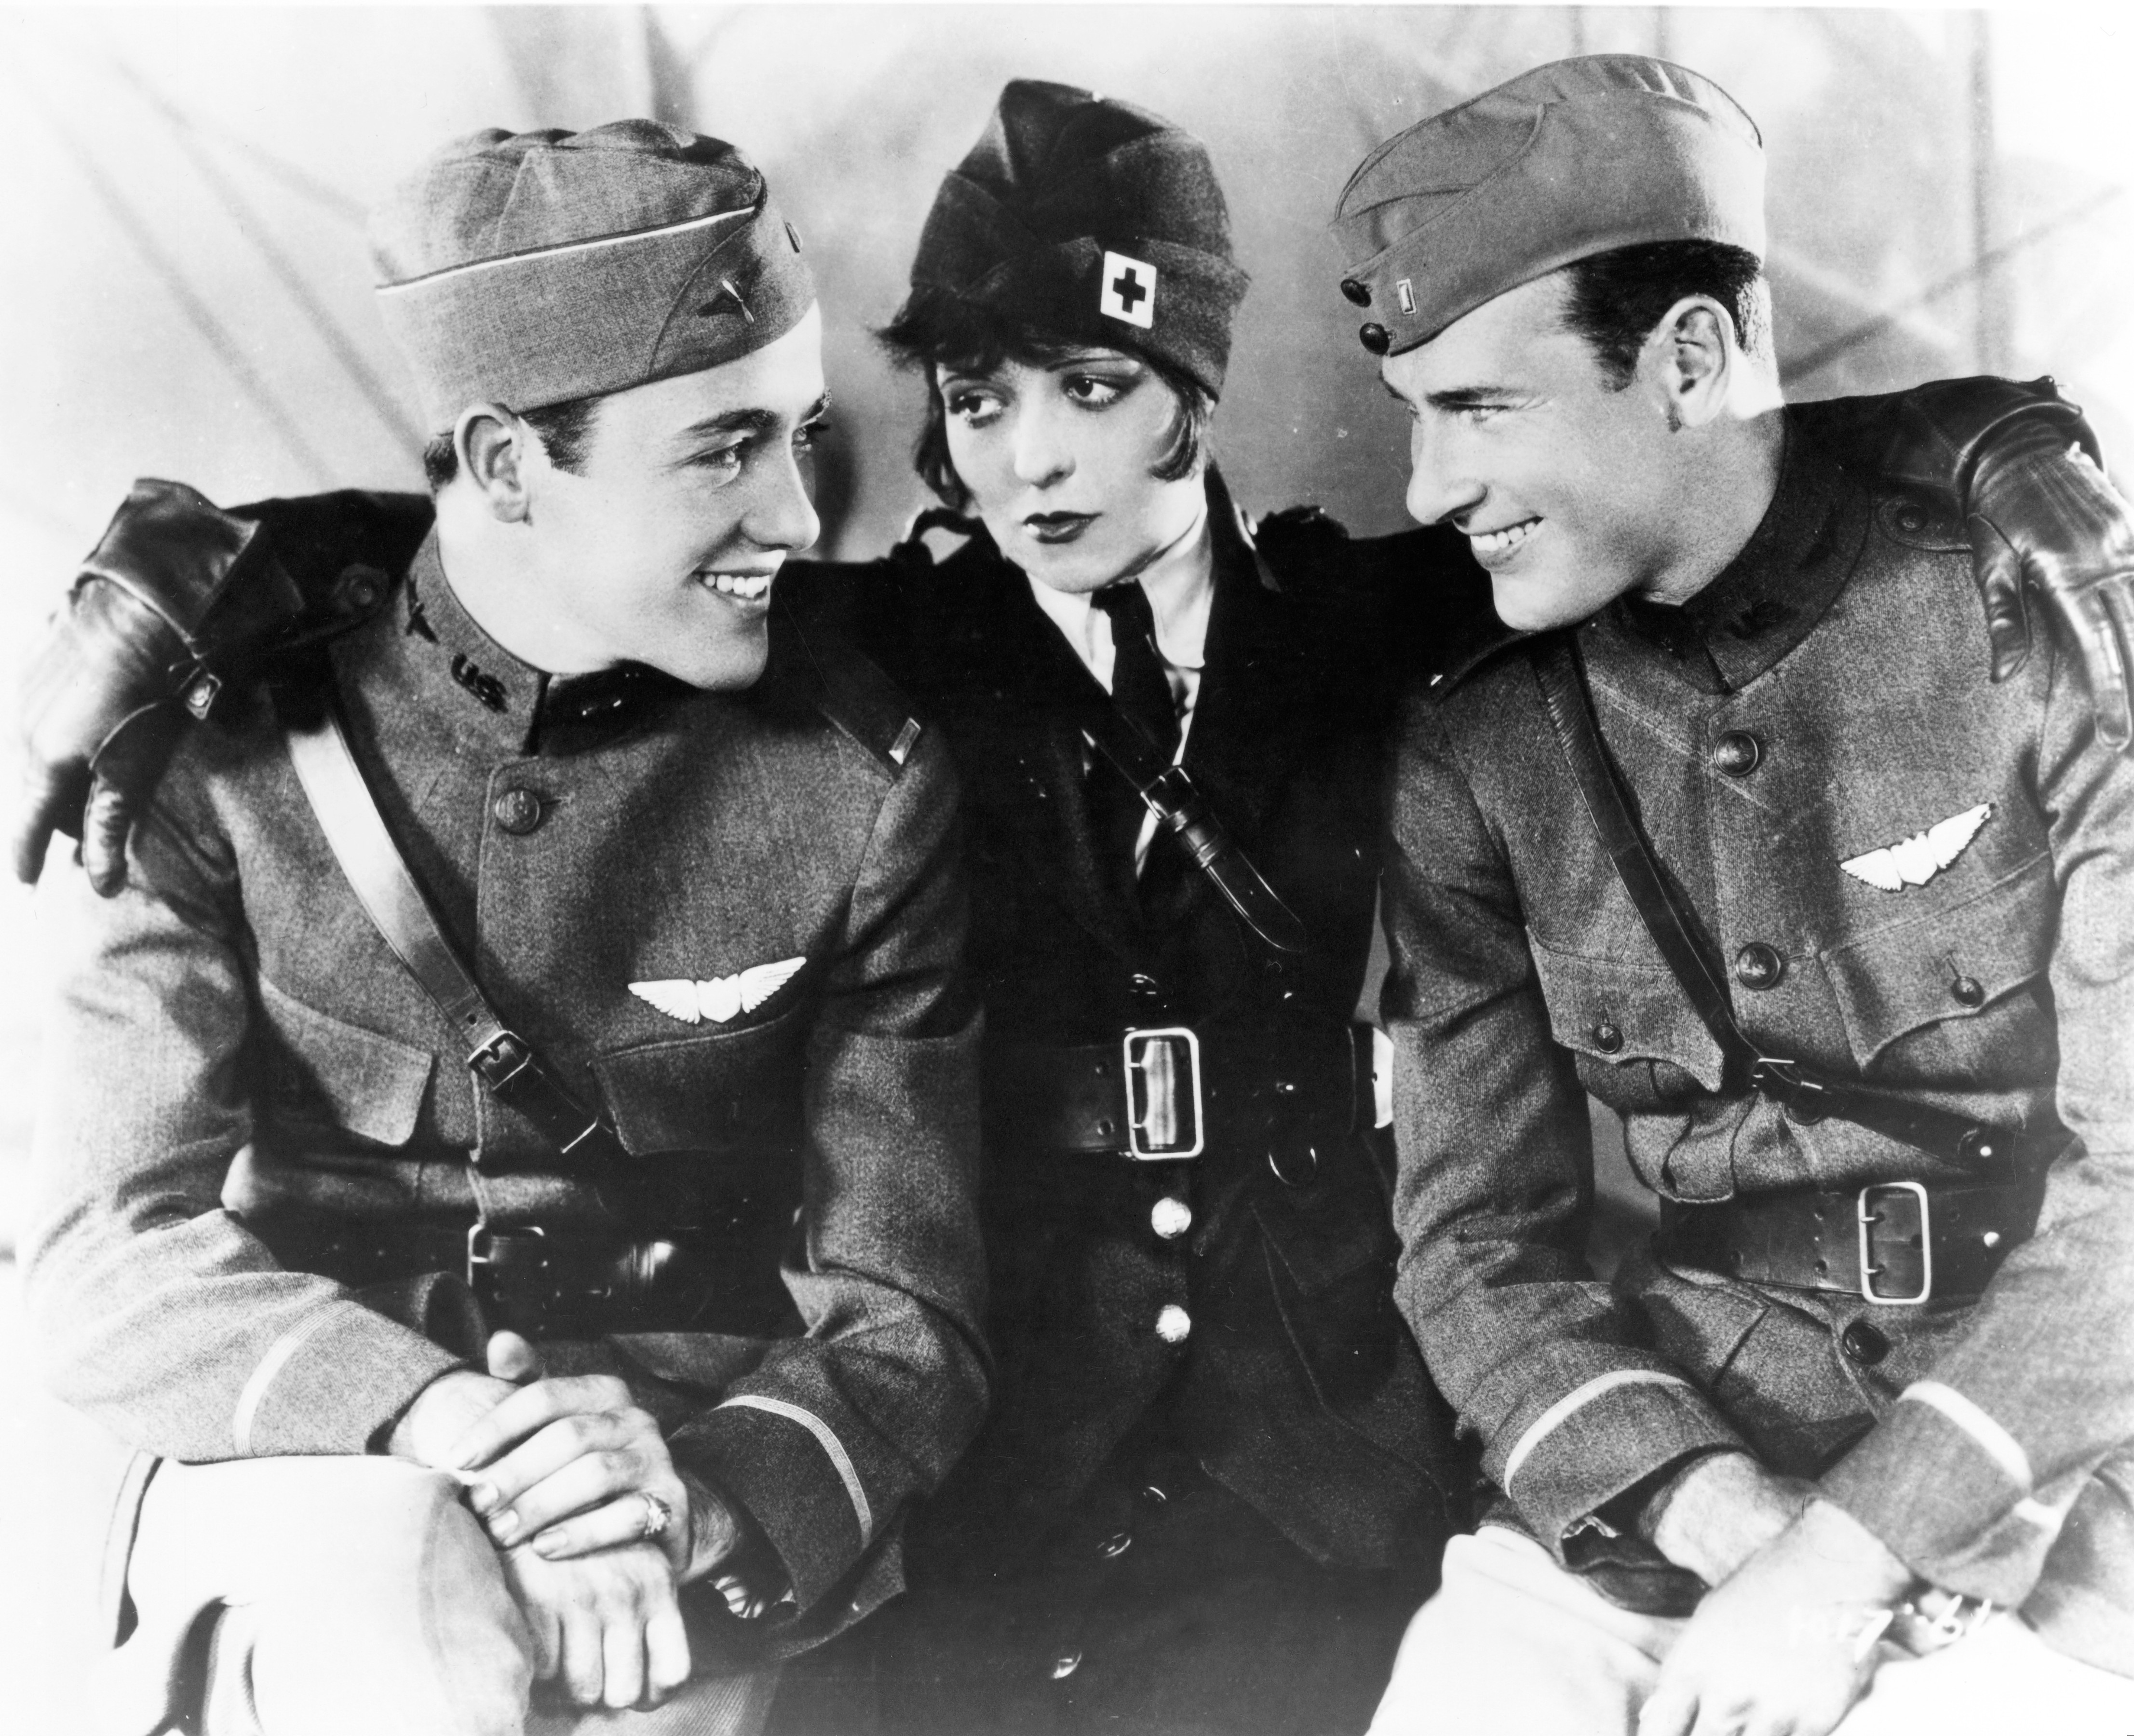 Shot in and around San Antonio, Texas, Wings was the first film to win an Academy Award for Best Picture in 1927. 